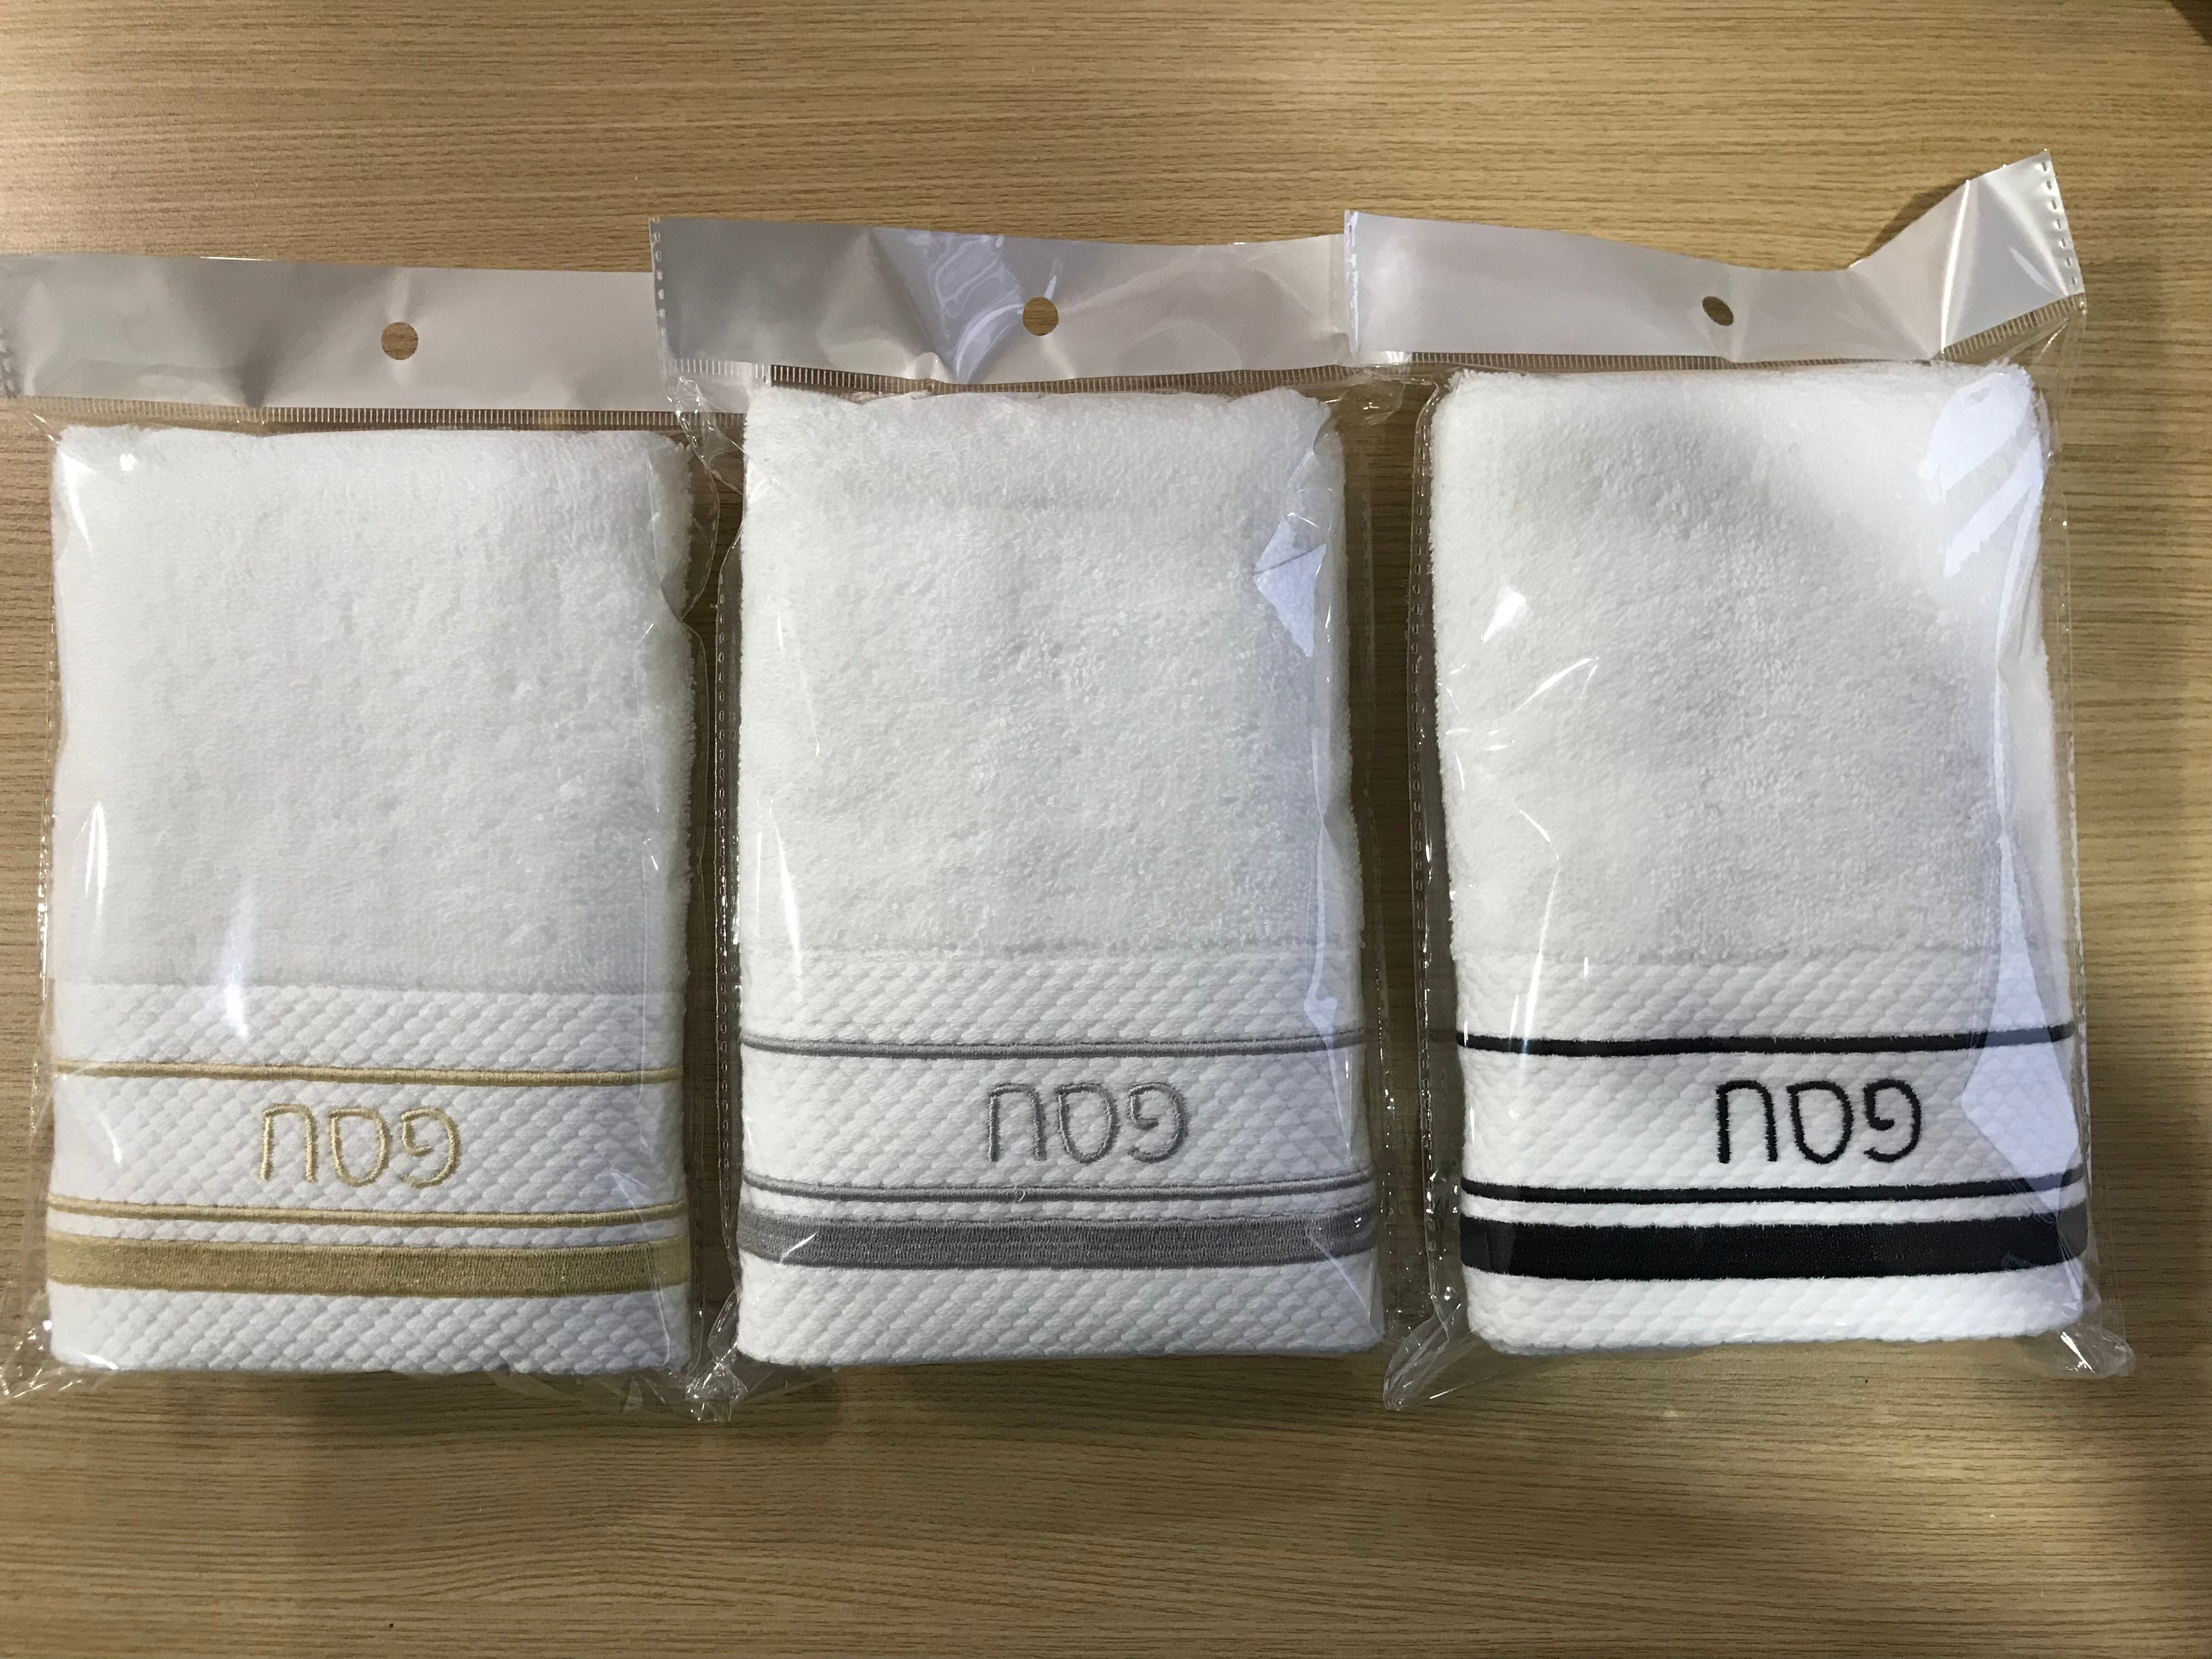 Luxury Hand Towel with Pesach Embroidery